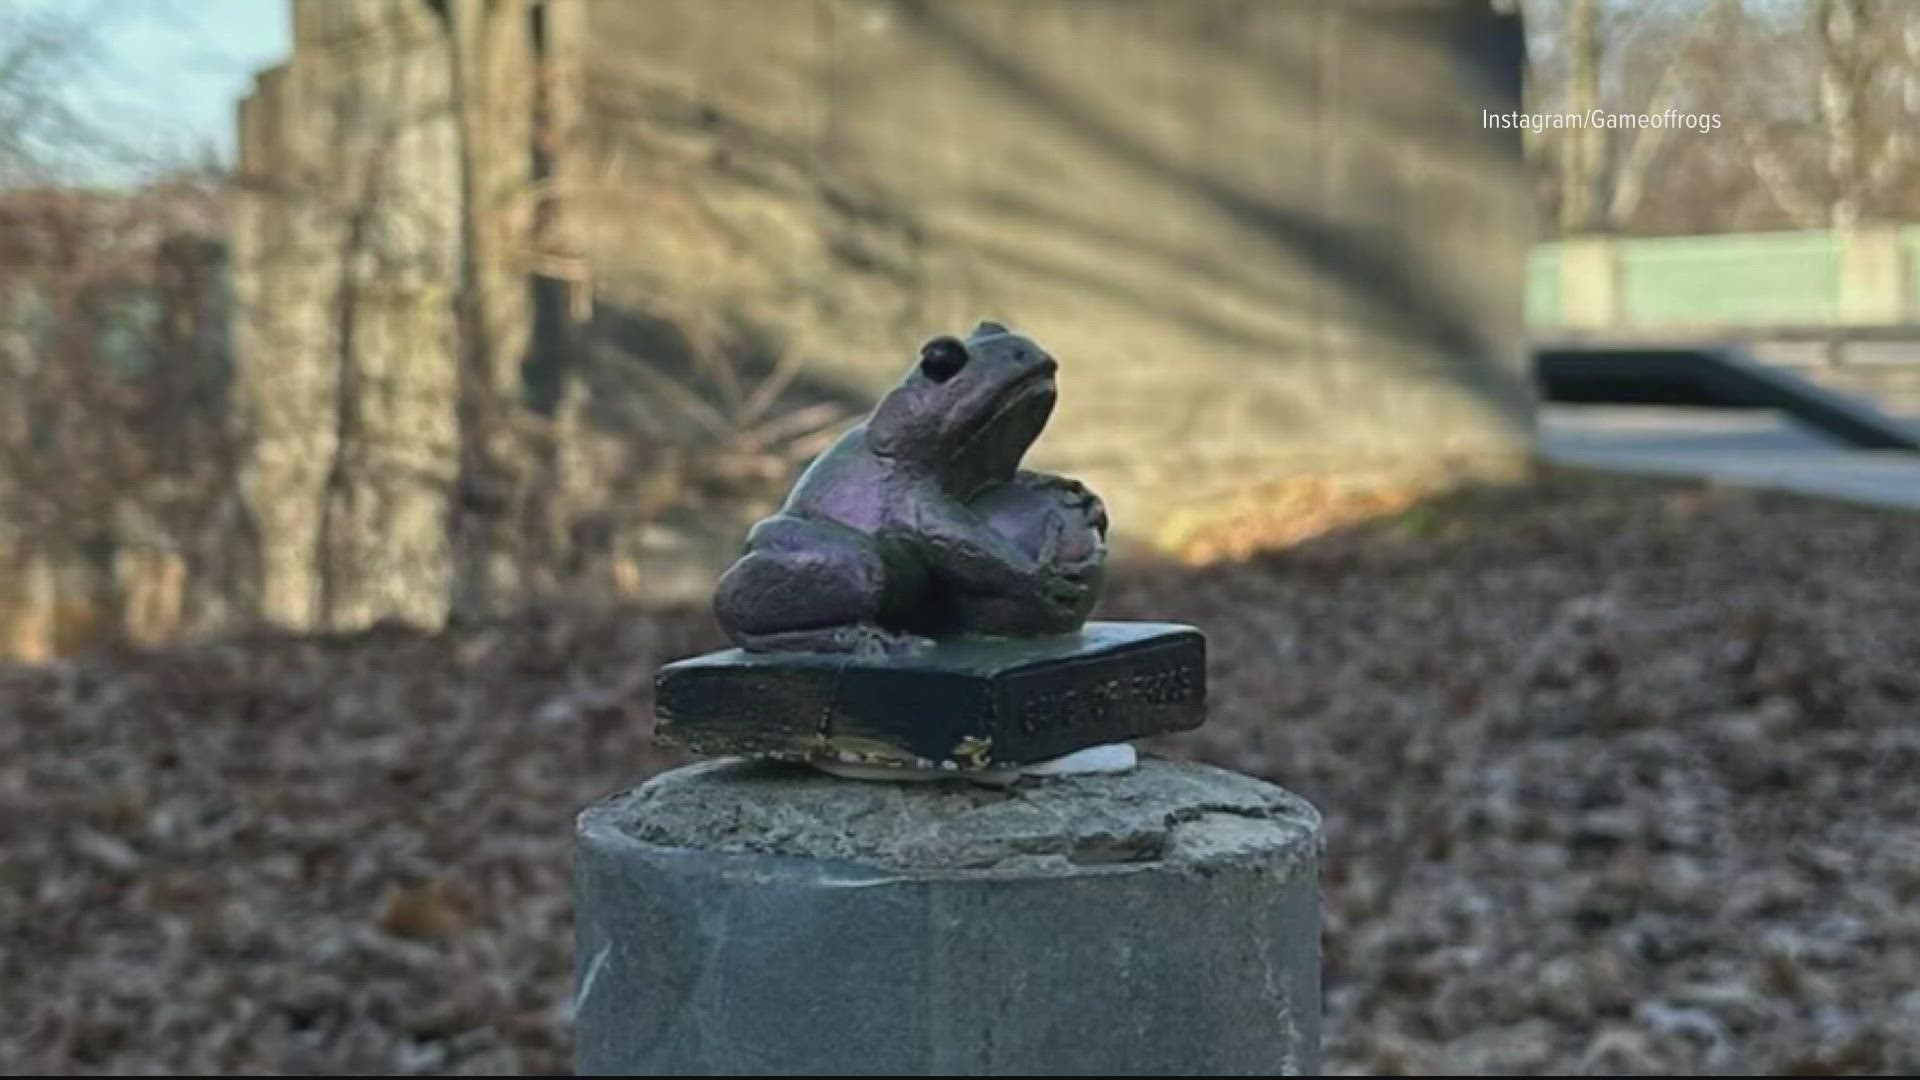 A frog holding a globe, maybe in different colors. So what's this all about?